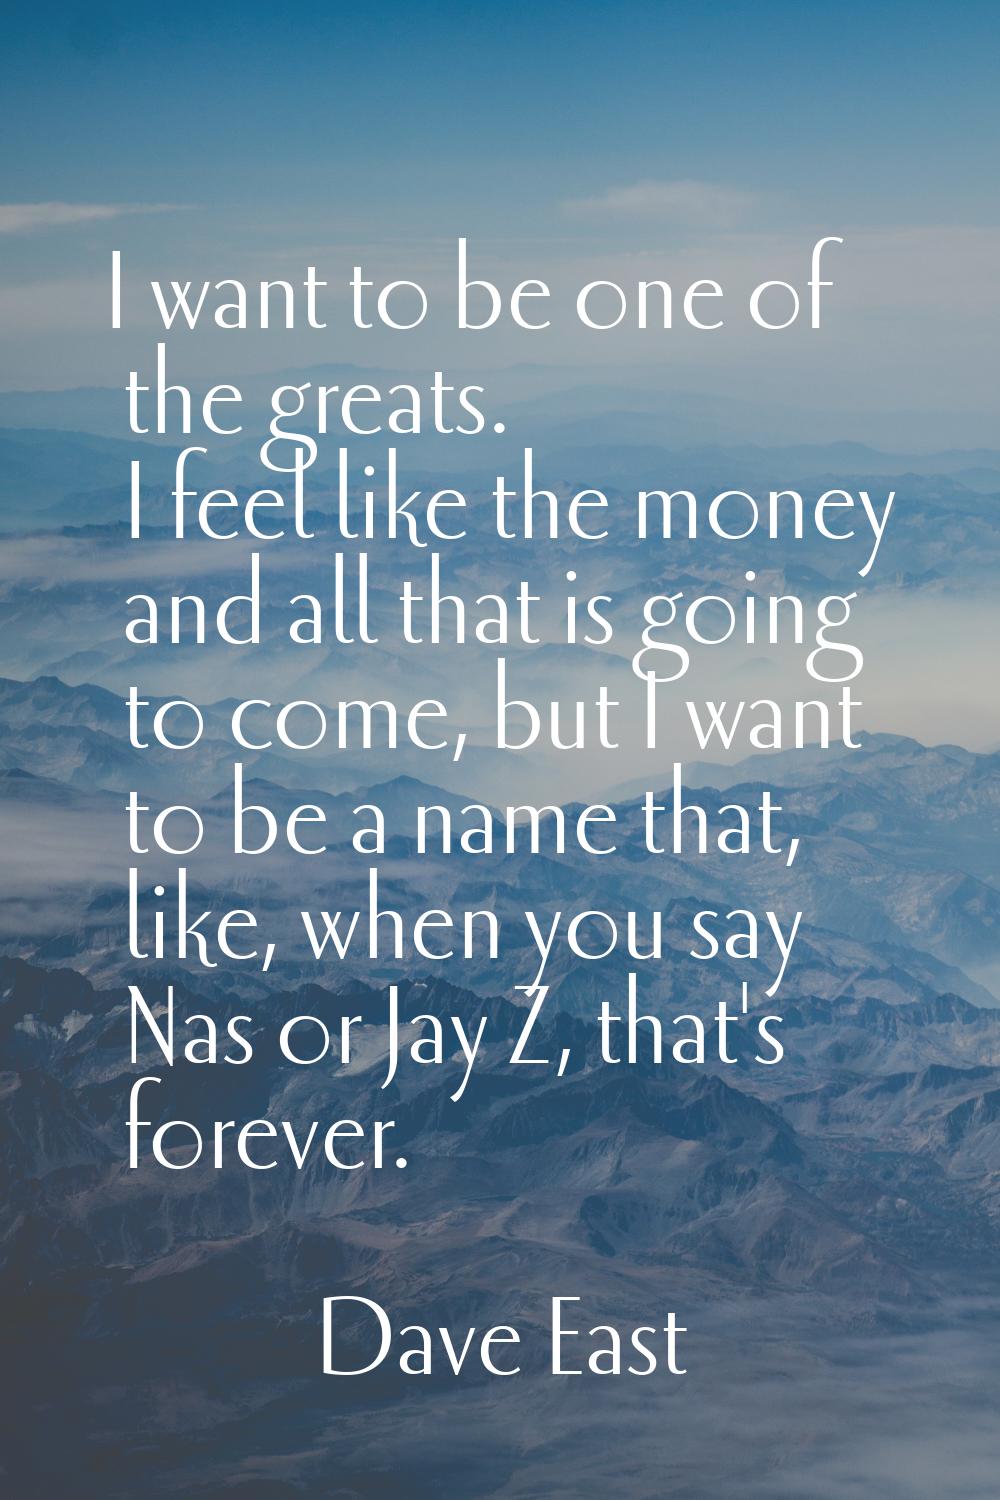 I want to be one of the greats. I feel like the money and all that is going to come, but I want to 